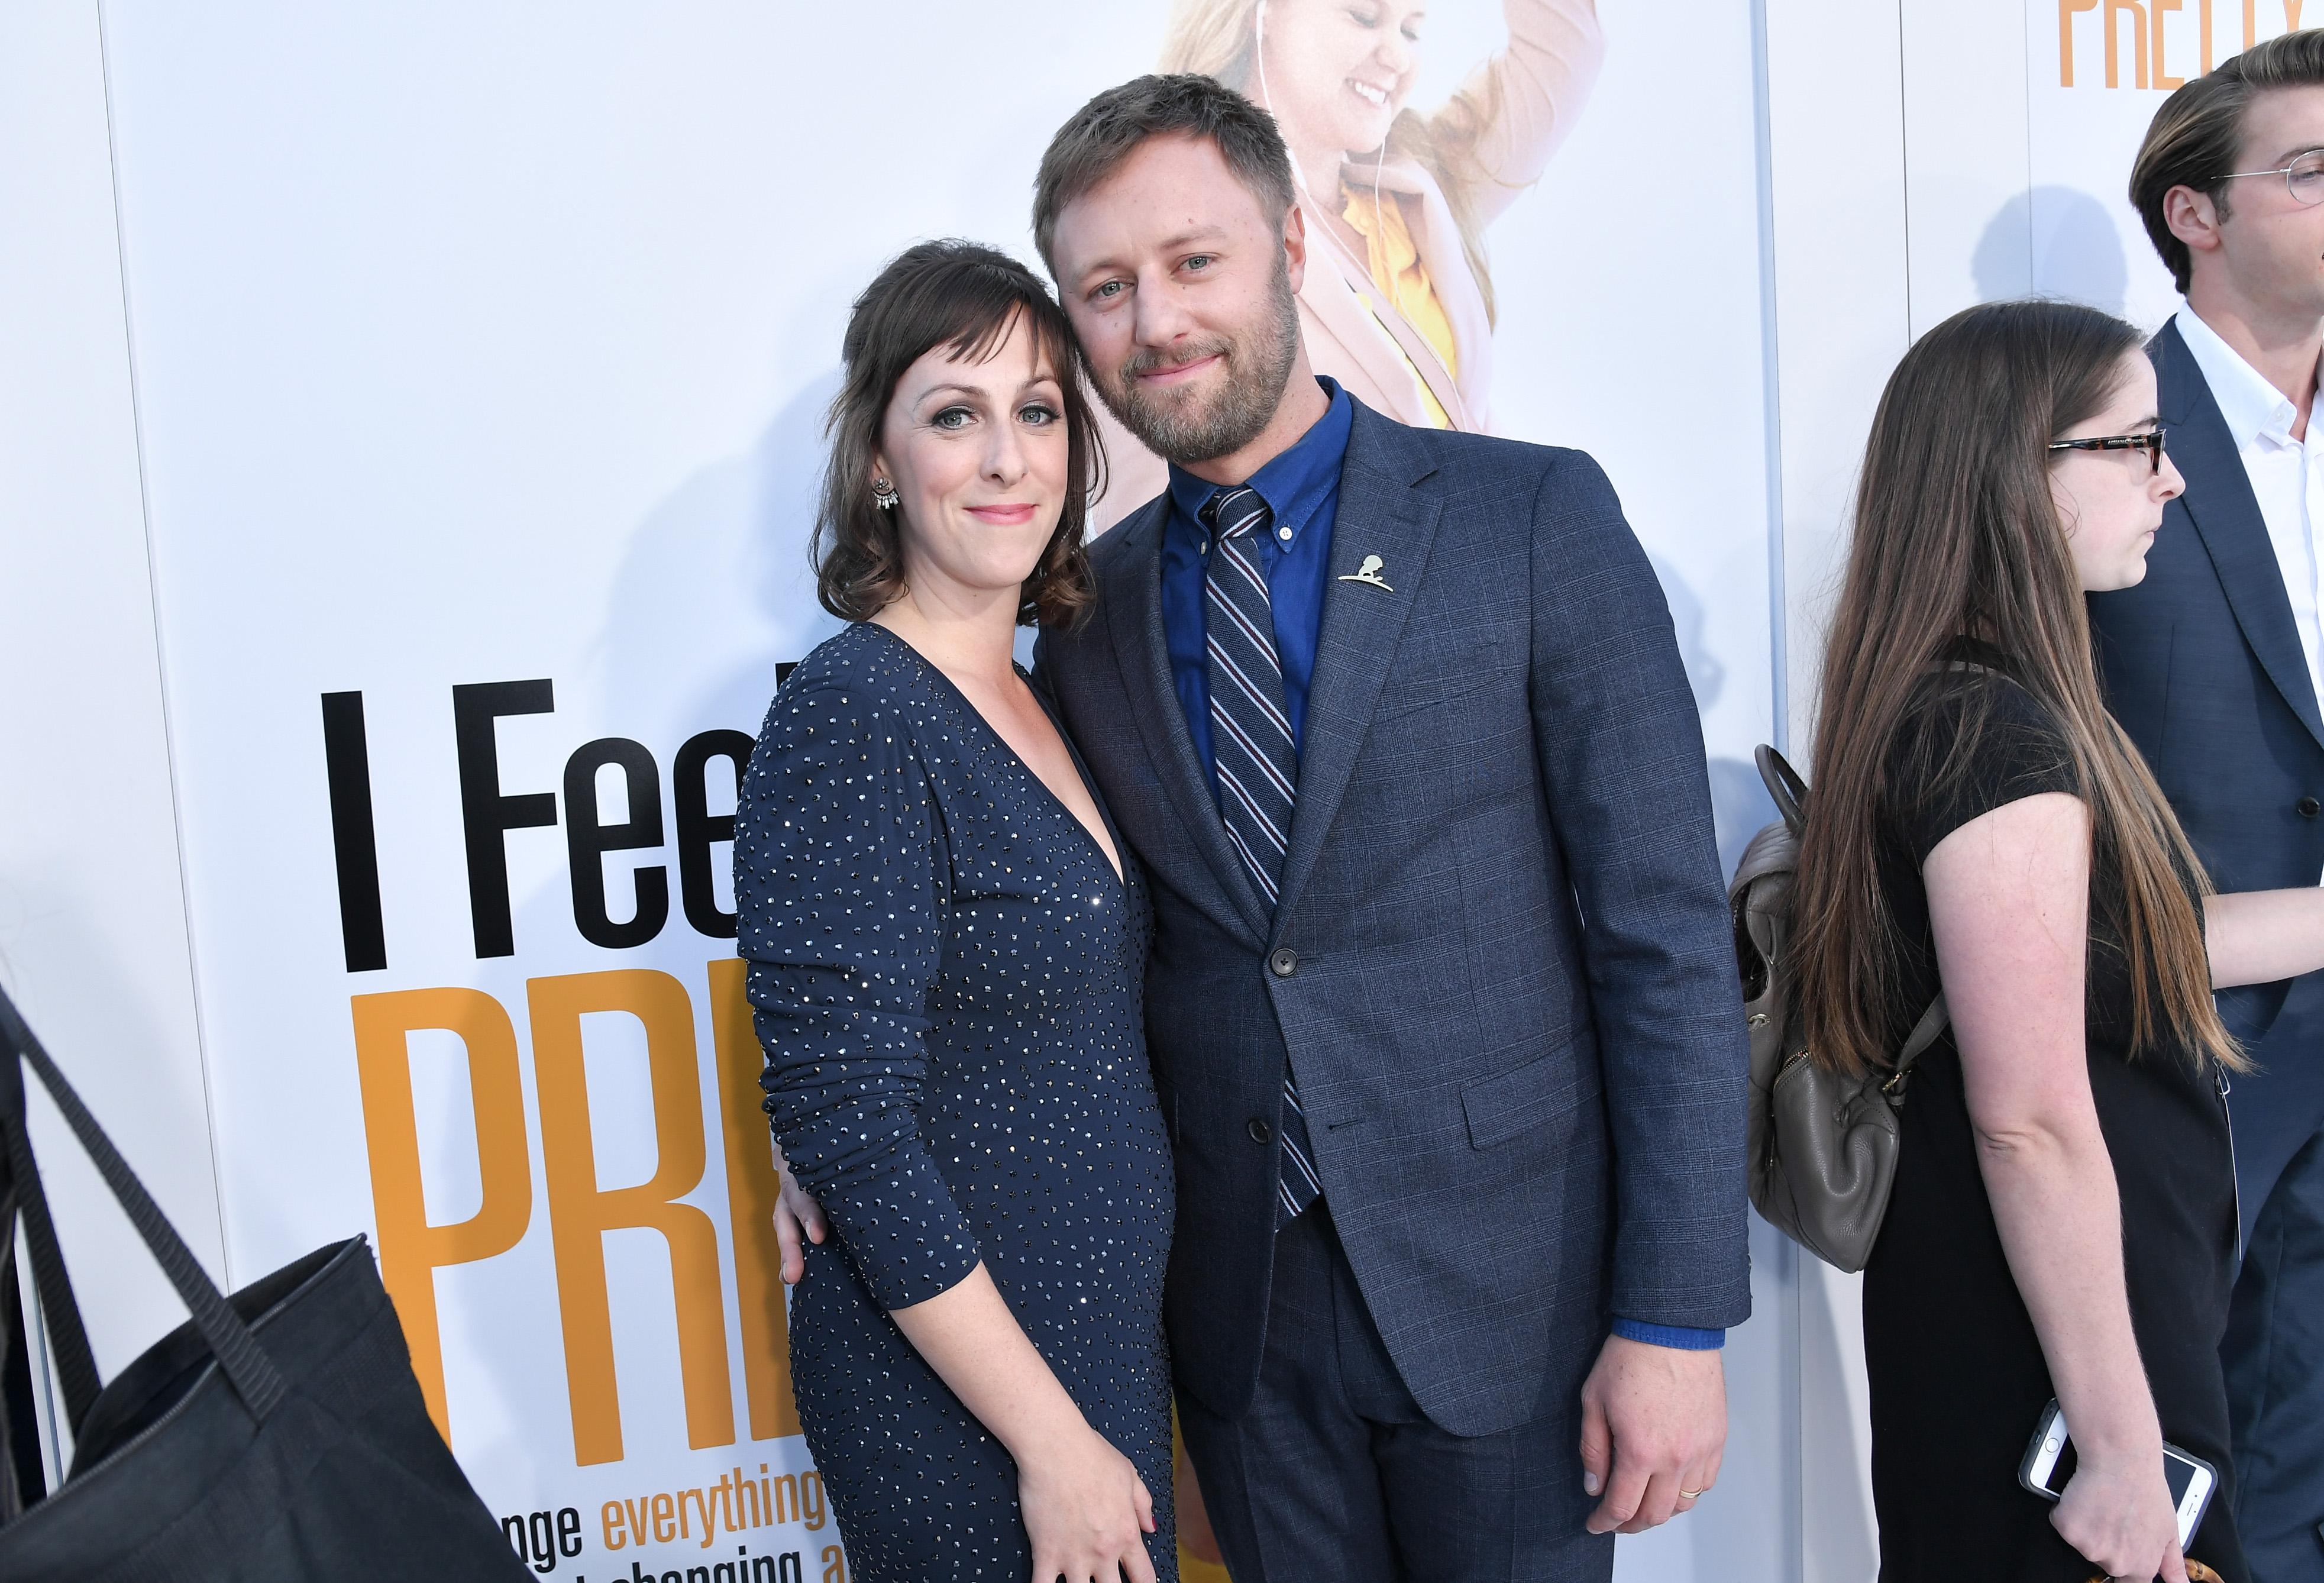 Jordan and Rory Scovel at the premiere of "I Feel Pretty" on April 17, 2018, in Los Angeles, California. | Source: Getty Images